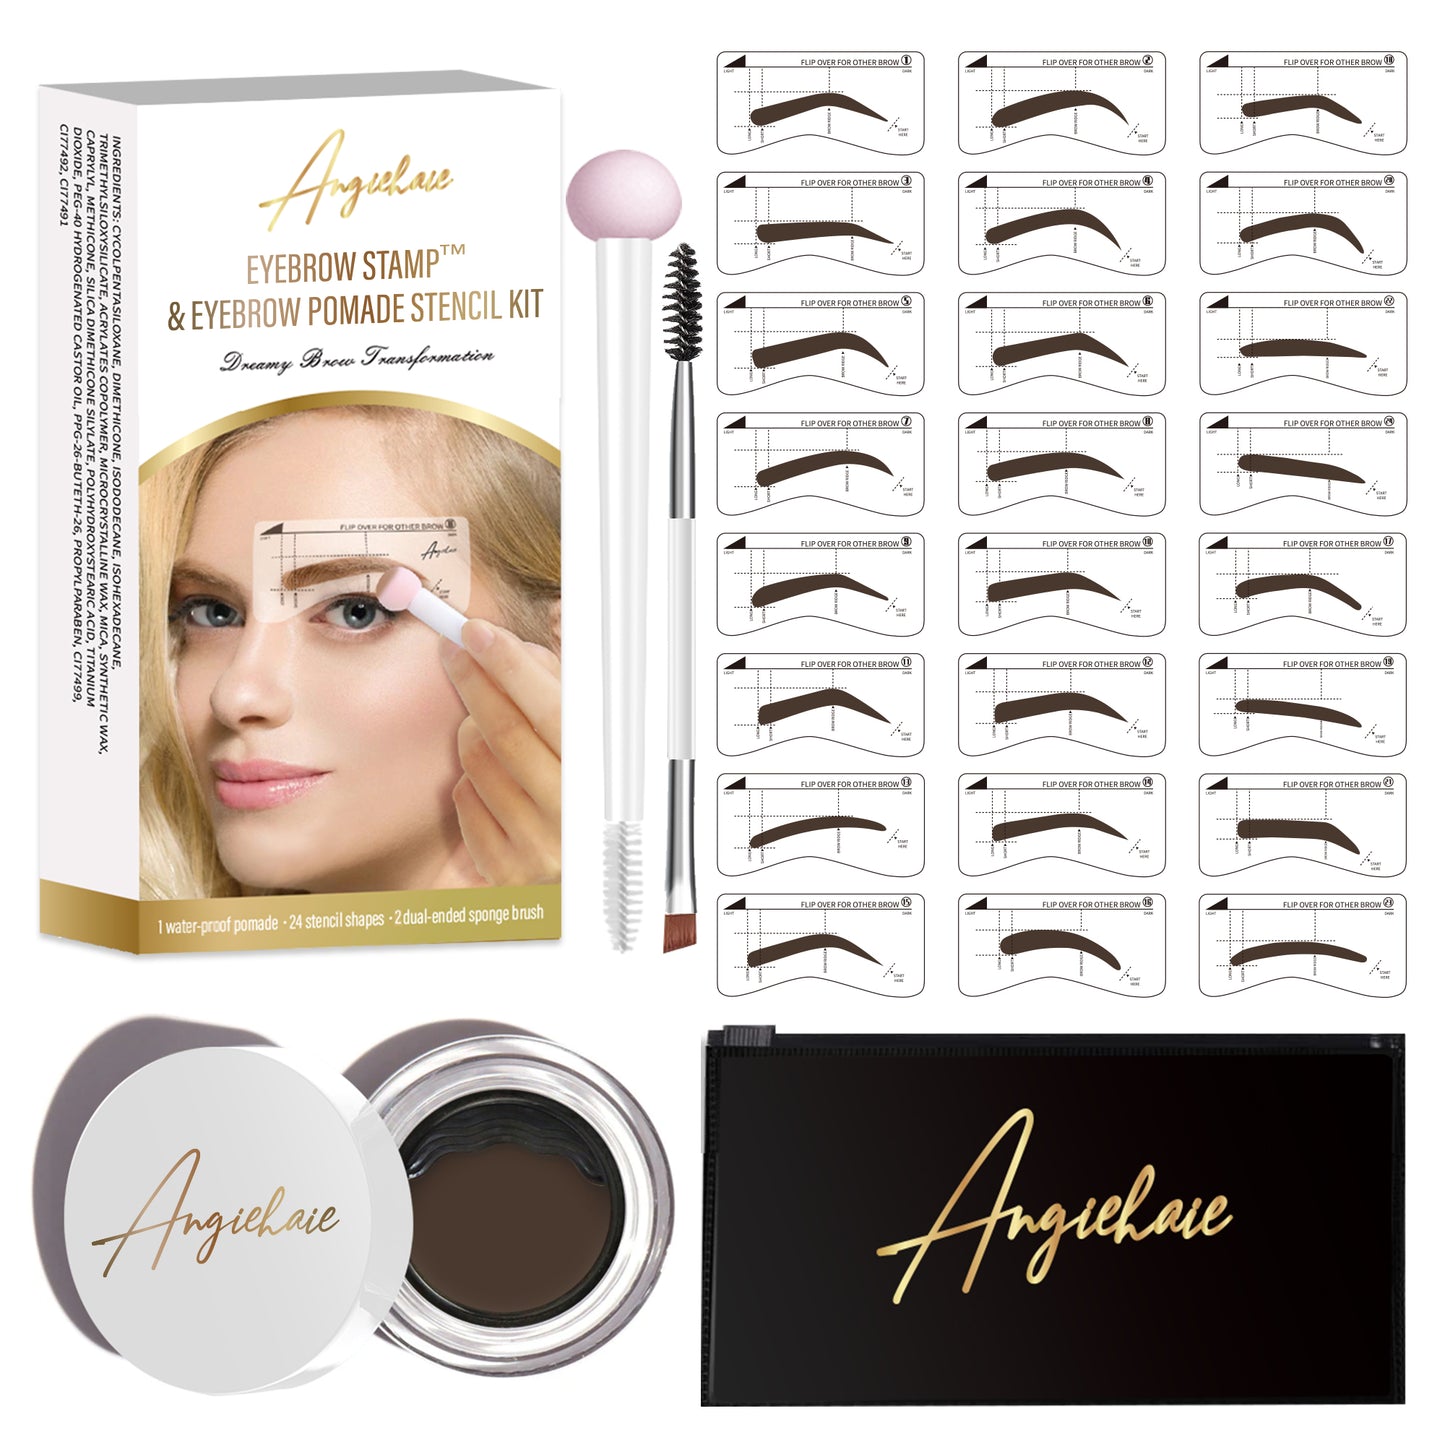 Eyebrow Stamp Stencil Kit, Brow Stamp, 24 Pieces Eyebrow Stencils Thick and Thin with 2 Dual Ended Brush and Sponge Applicators, Perfect Natural Brow, Waterproof - Angiehaie Beauty